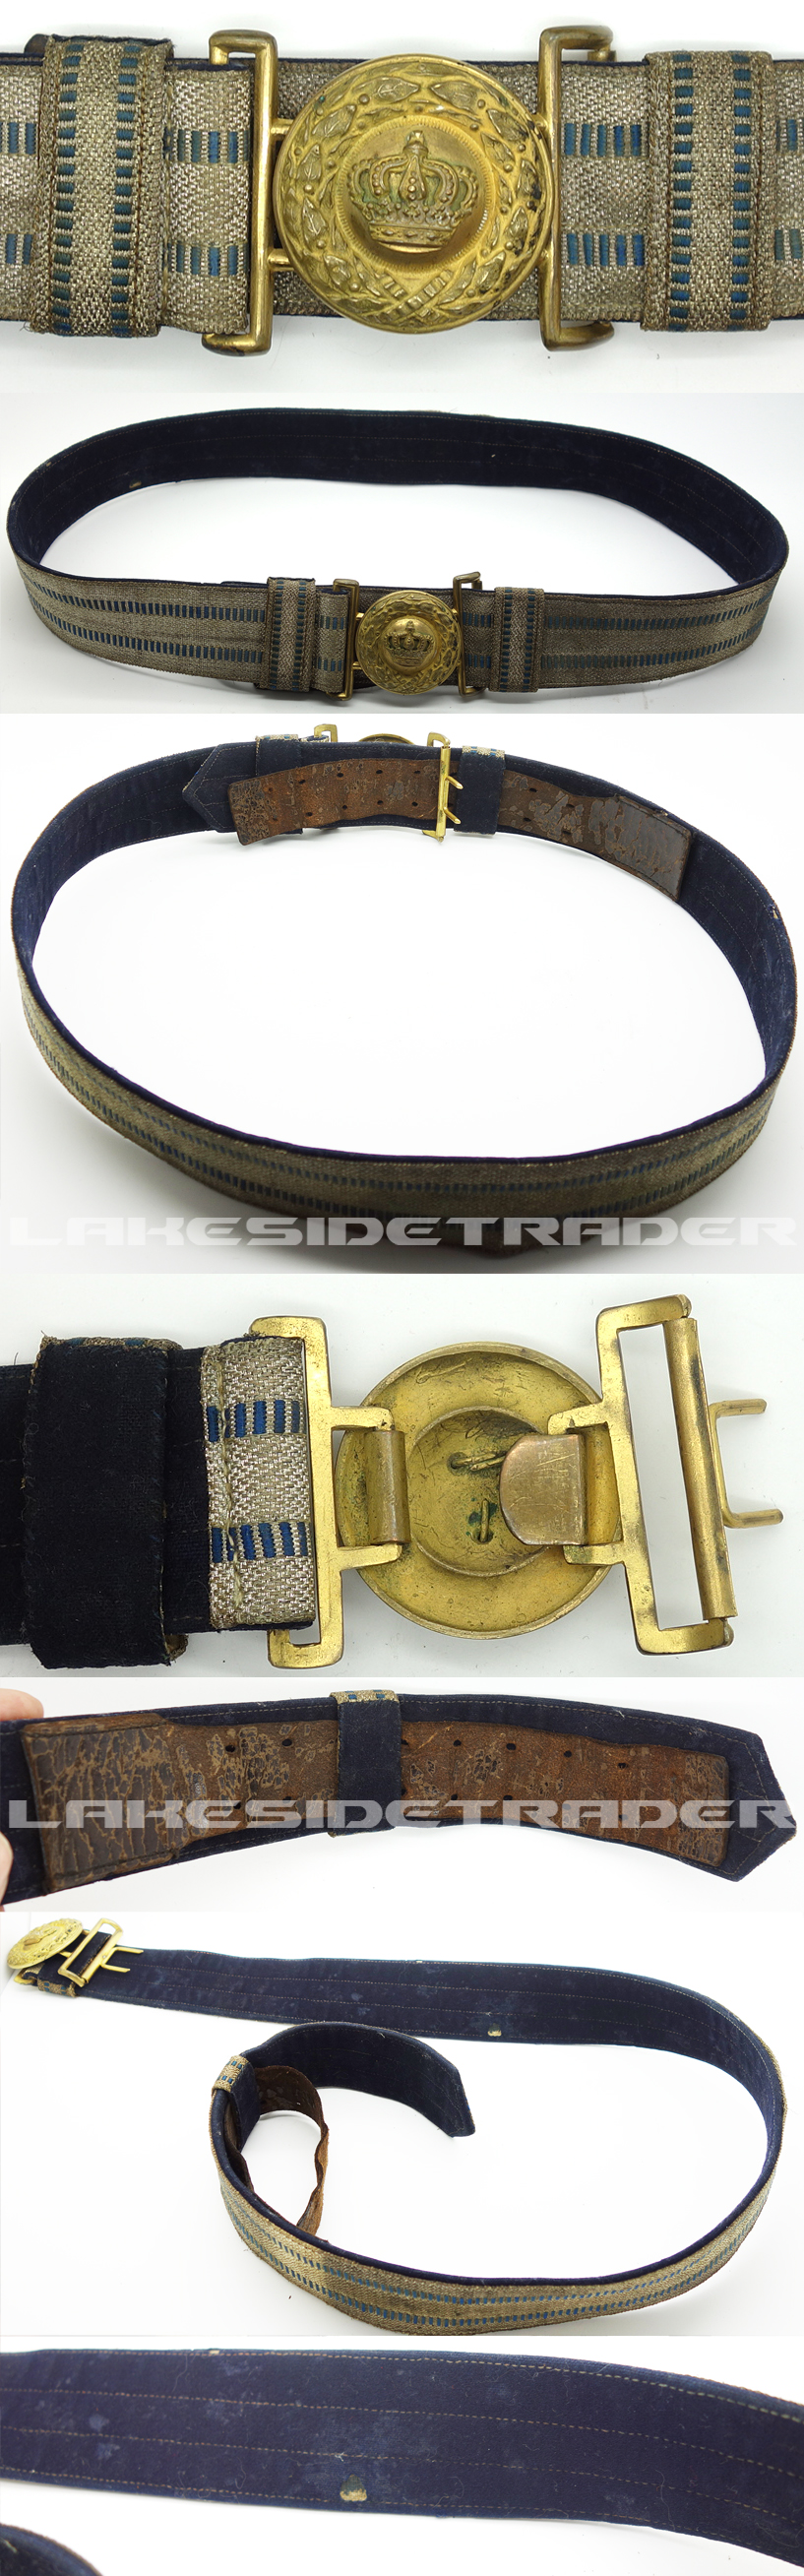 Imperial Officer Brocade Belt and buckle